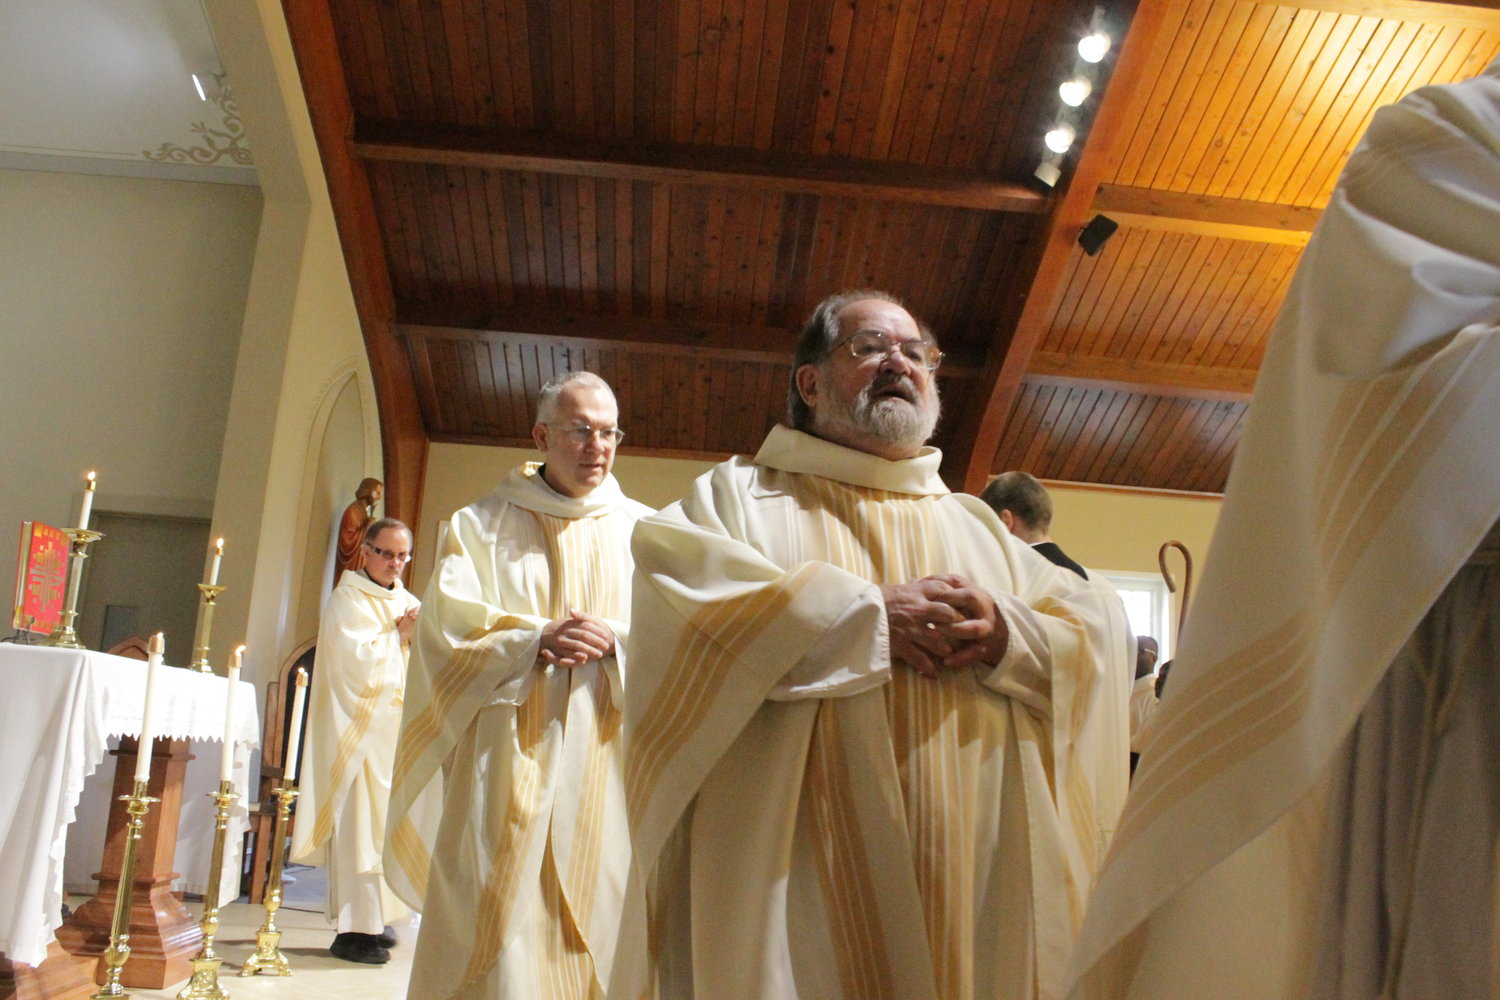 (From left) Father Michael Murphy, Father Christopher Cordes, Father David Means and other priests process into St. Brendan Church in Mexico to offer Mass with Bishop W. Shawn McKnight for the repose of the souls of the deceased priests and bishops of this diocese.